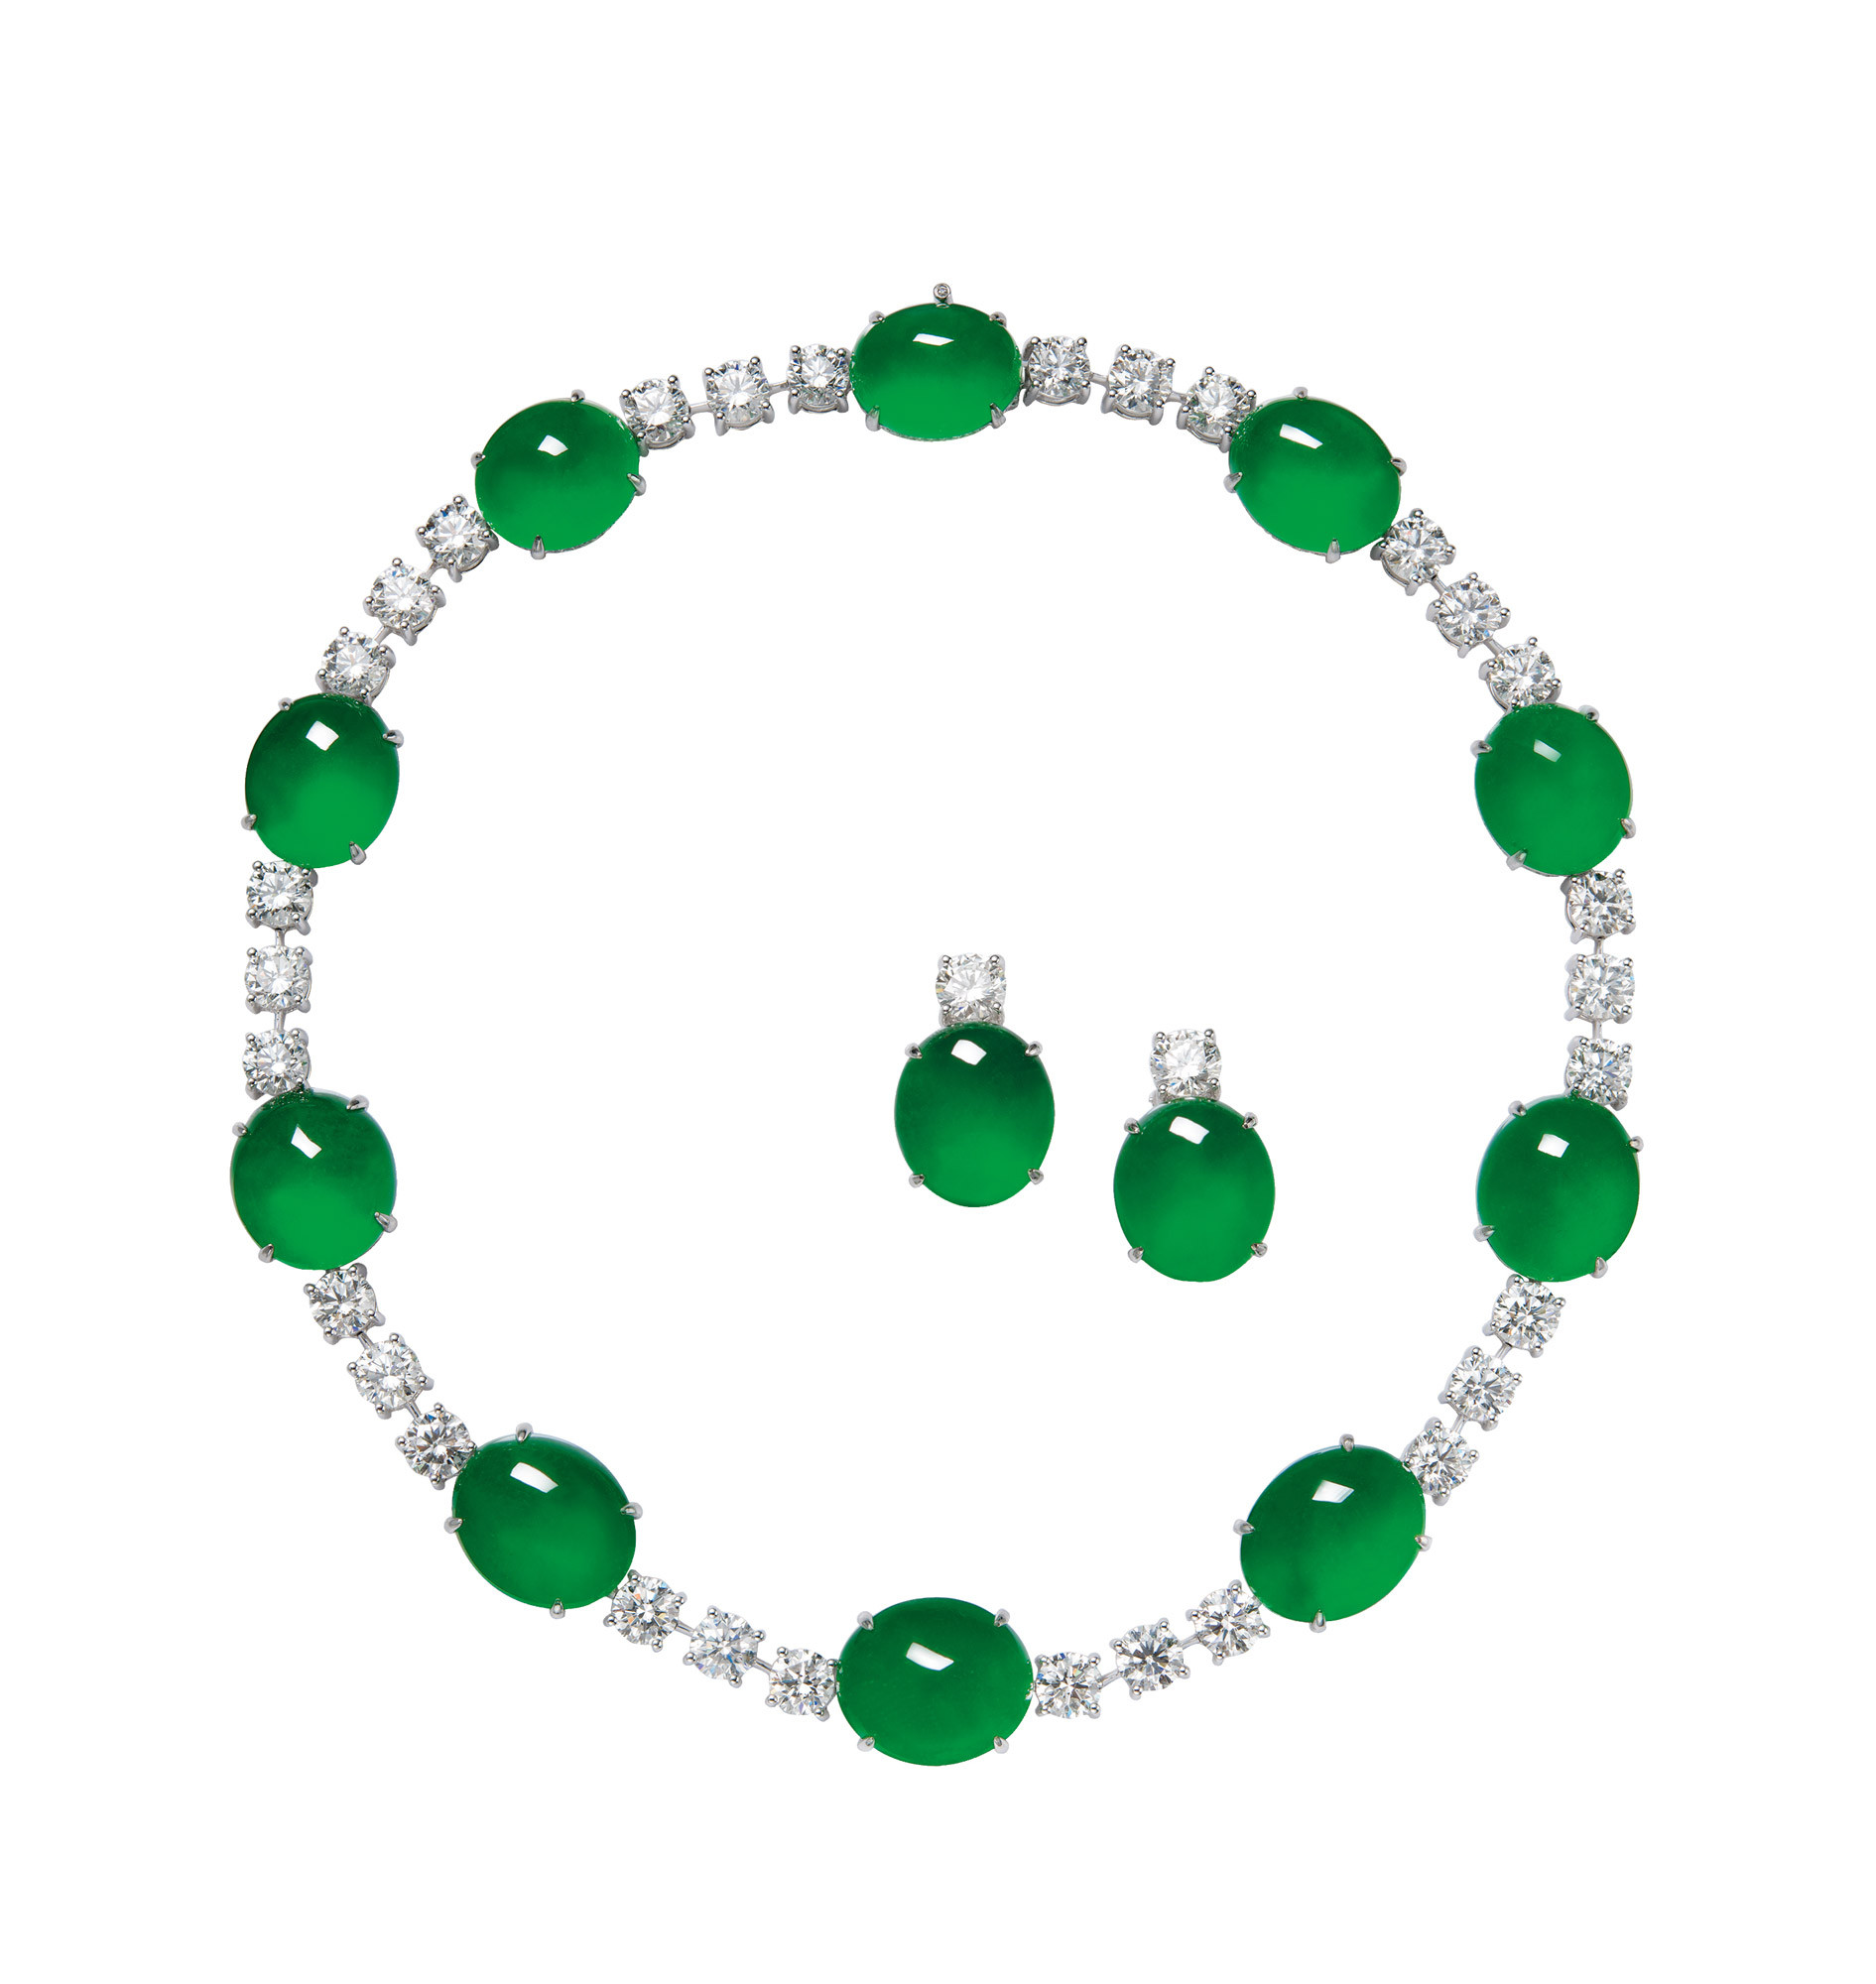 A HIGHLY IMPORTANT SET OF ‘IMPERIAL GREEN’ JADEITE CABOCHON AND DIAMOND JEWELRY